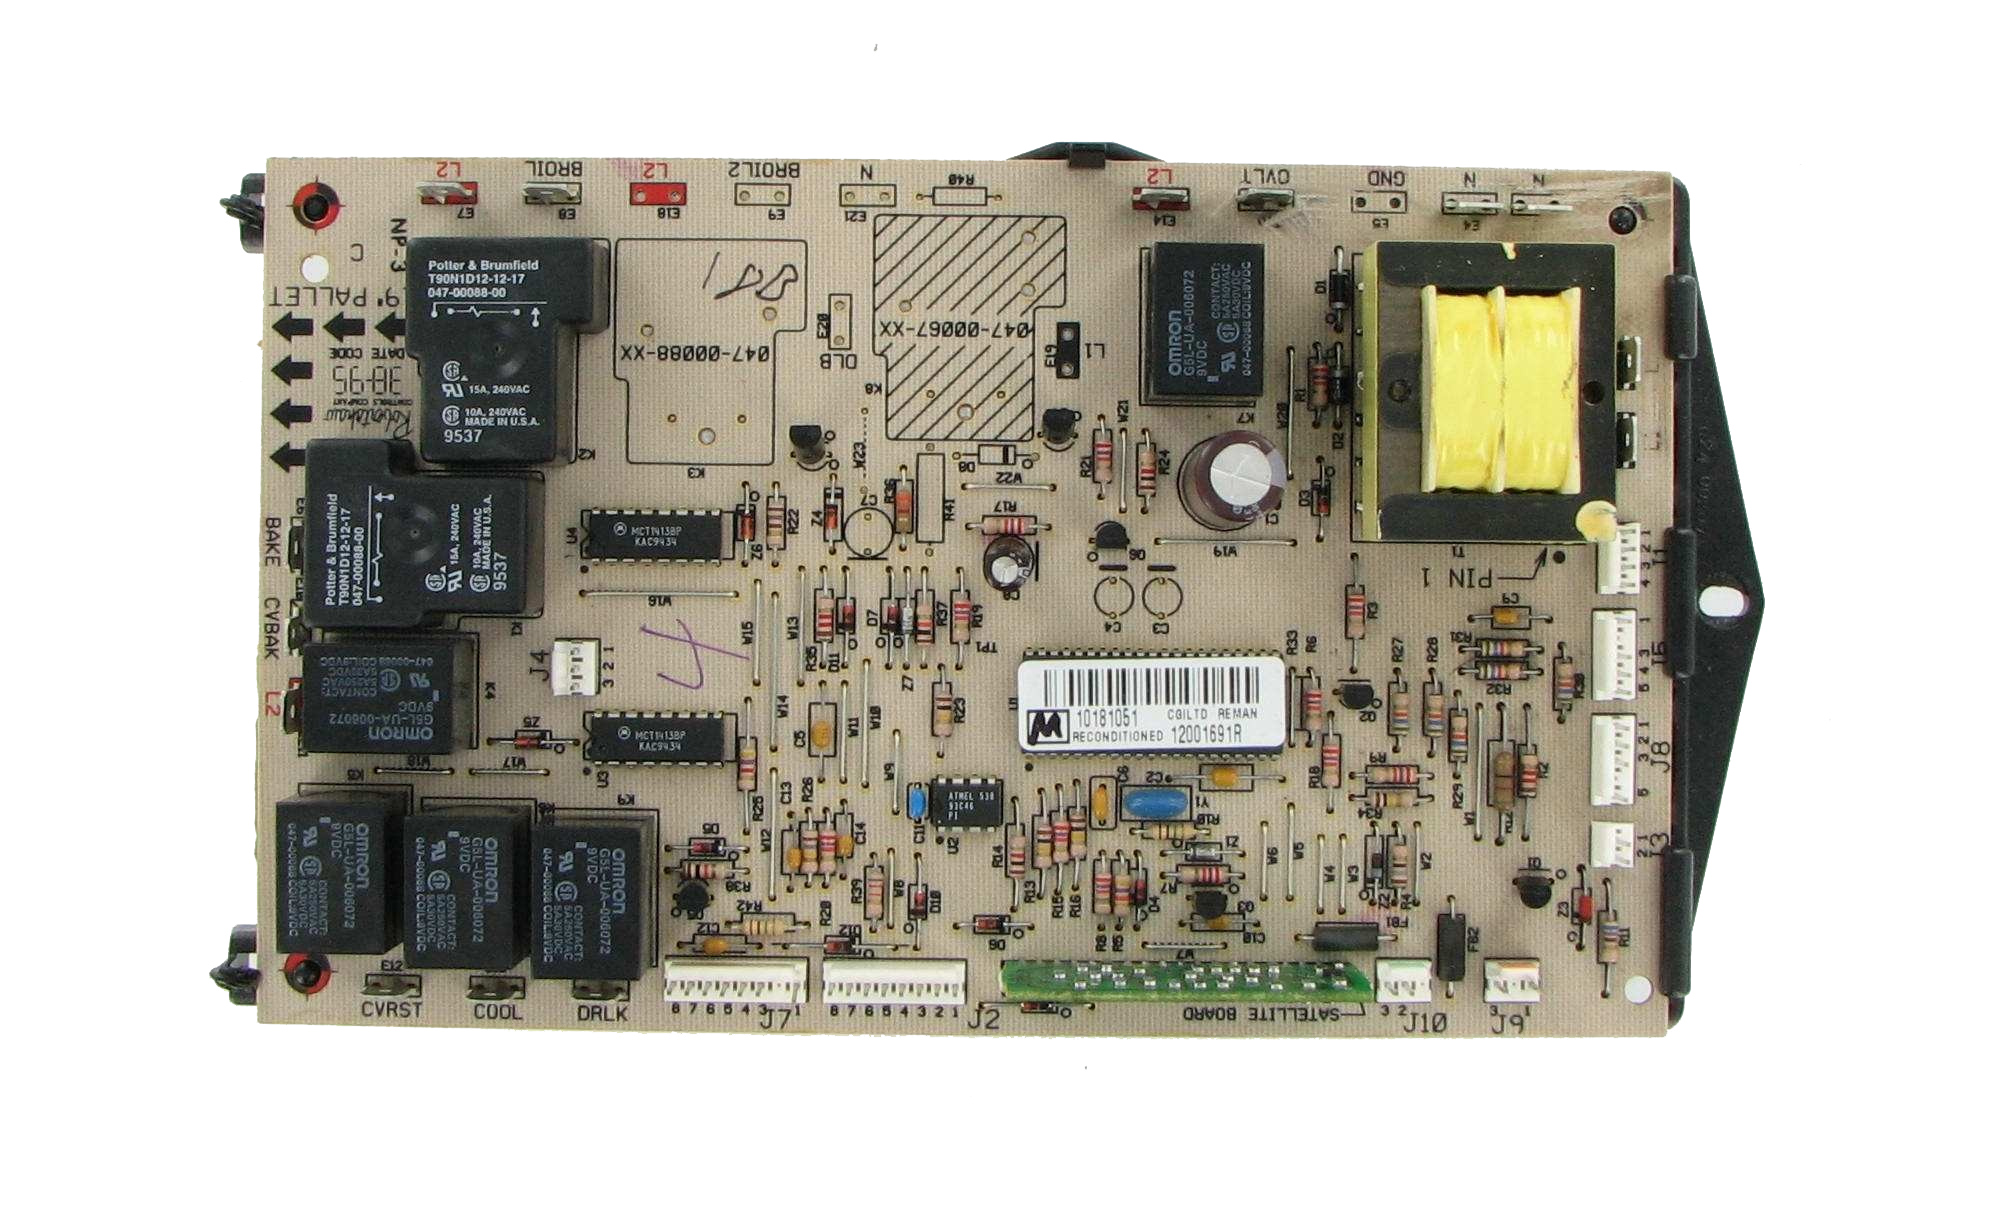 Range Control Board 71001850 Repair Service For Maytag Oven 